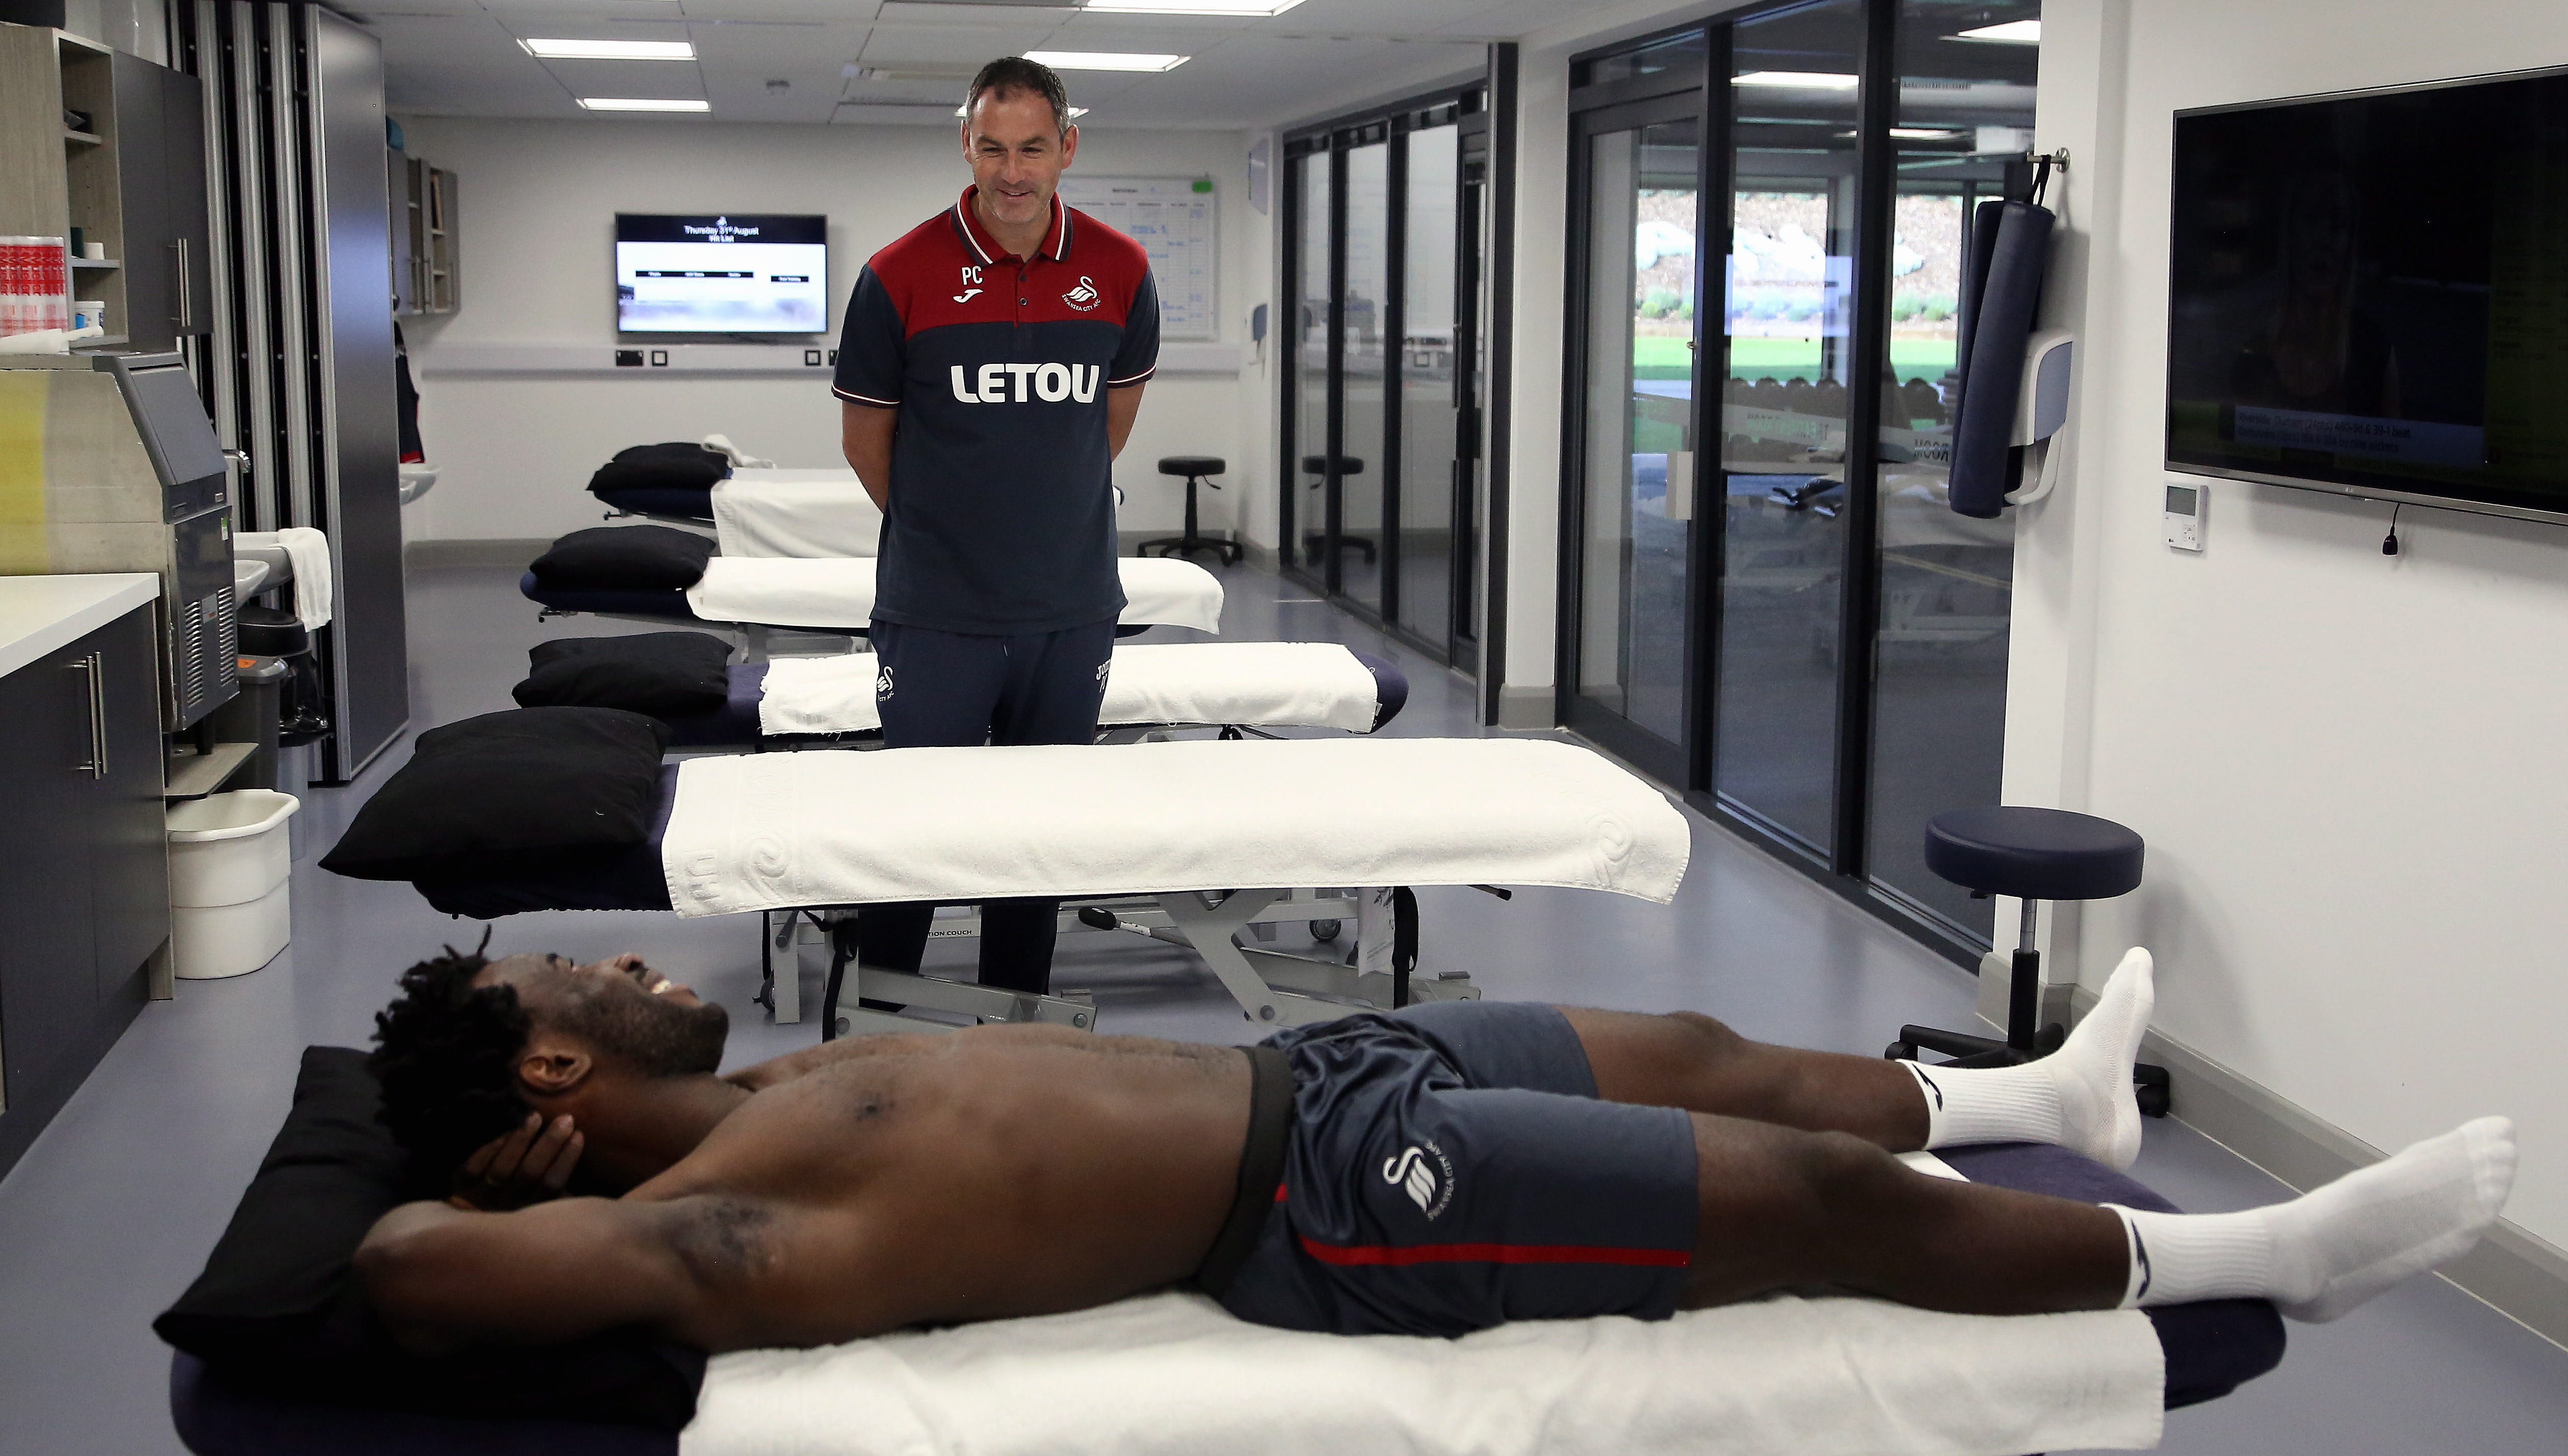 Pictured: Wilfried Bony speaks with manager Paul Clement during his medical with club physiotherapist Kate Rees at the Fairwood Training Ground, Wales, UK. Thursday 31 August 2017 Re: Wilfried Bony has signed a contract with Swansea City FC.